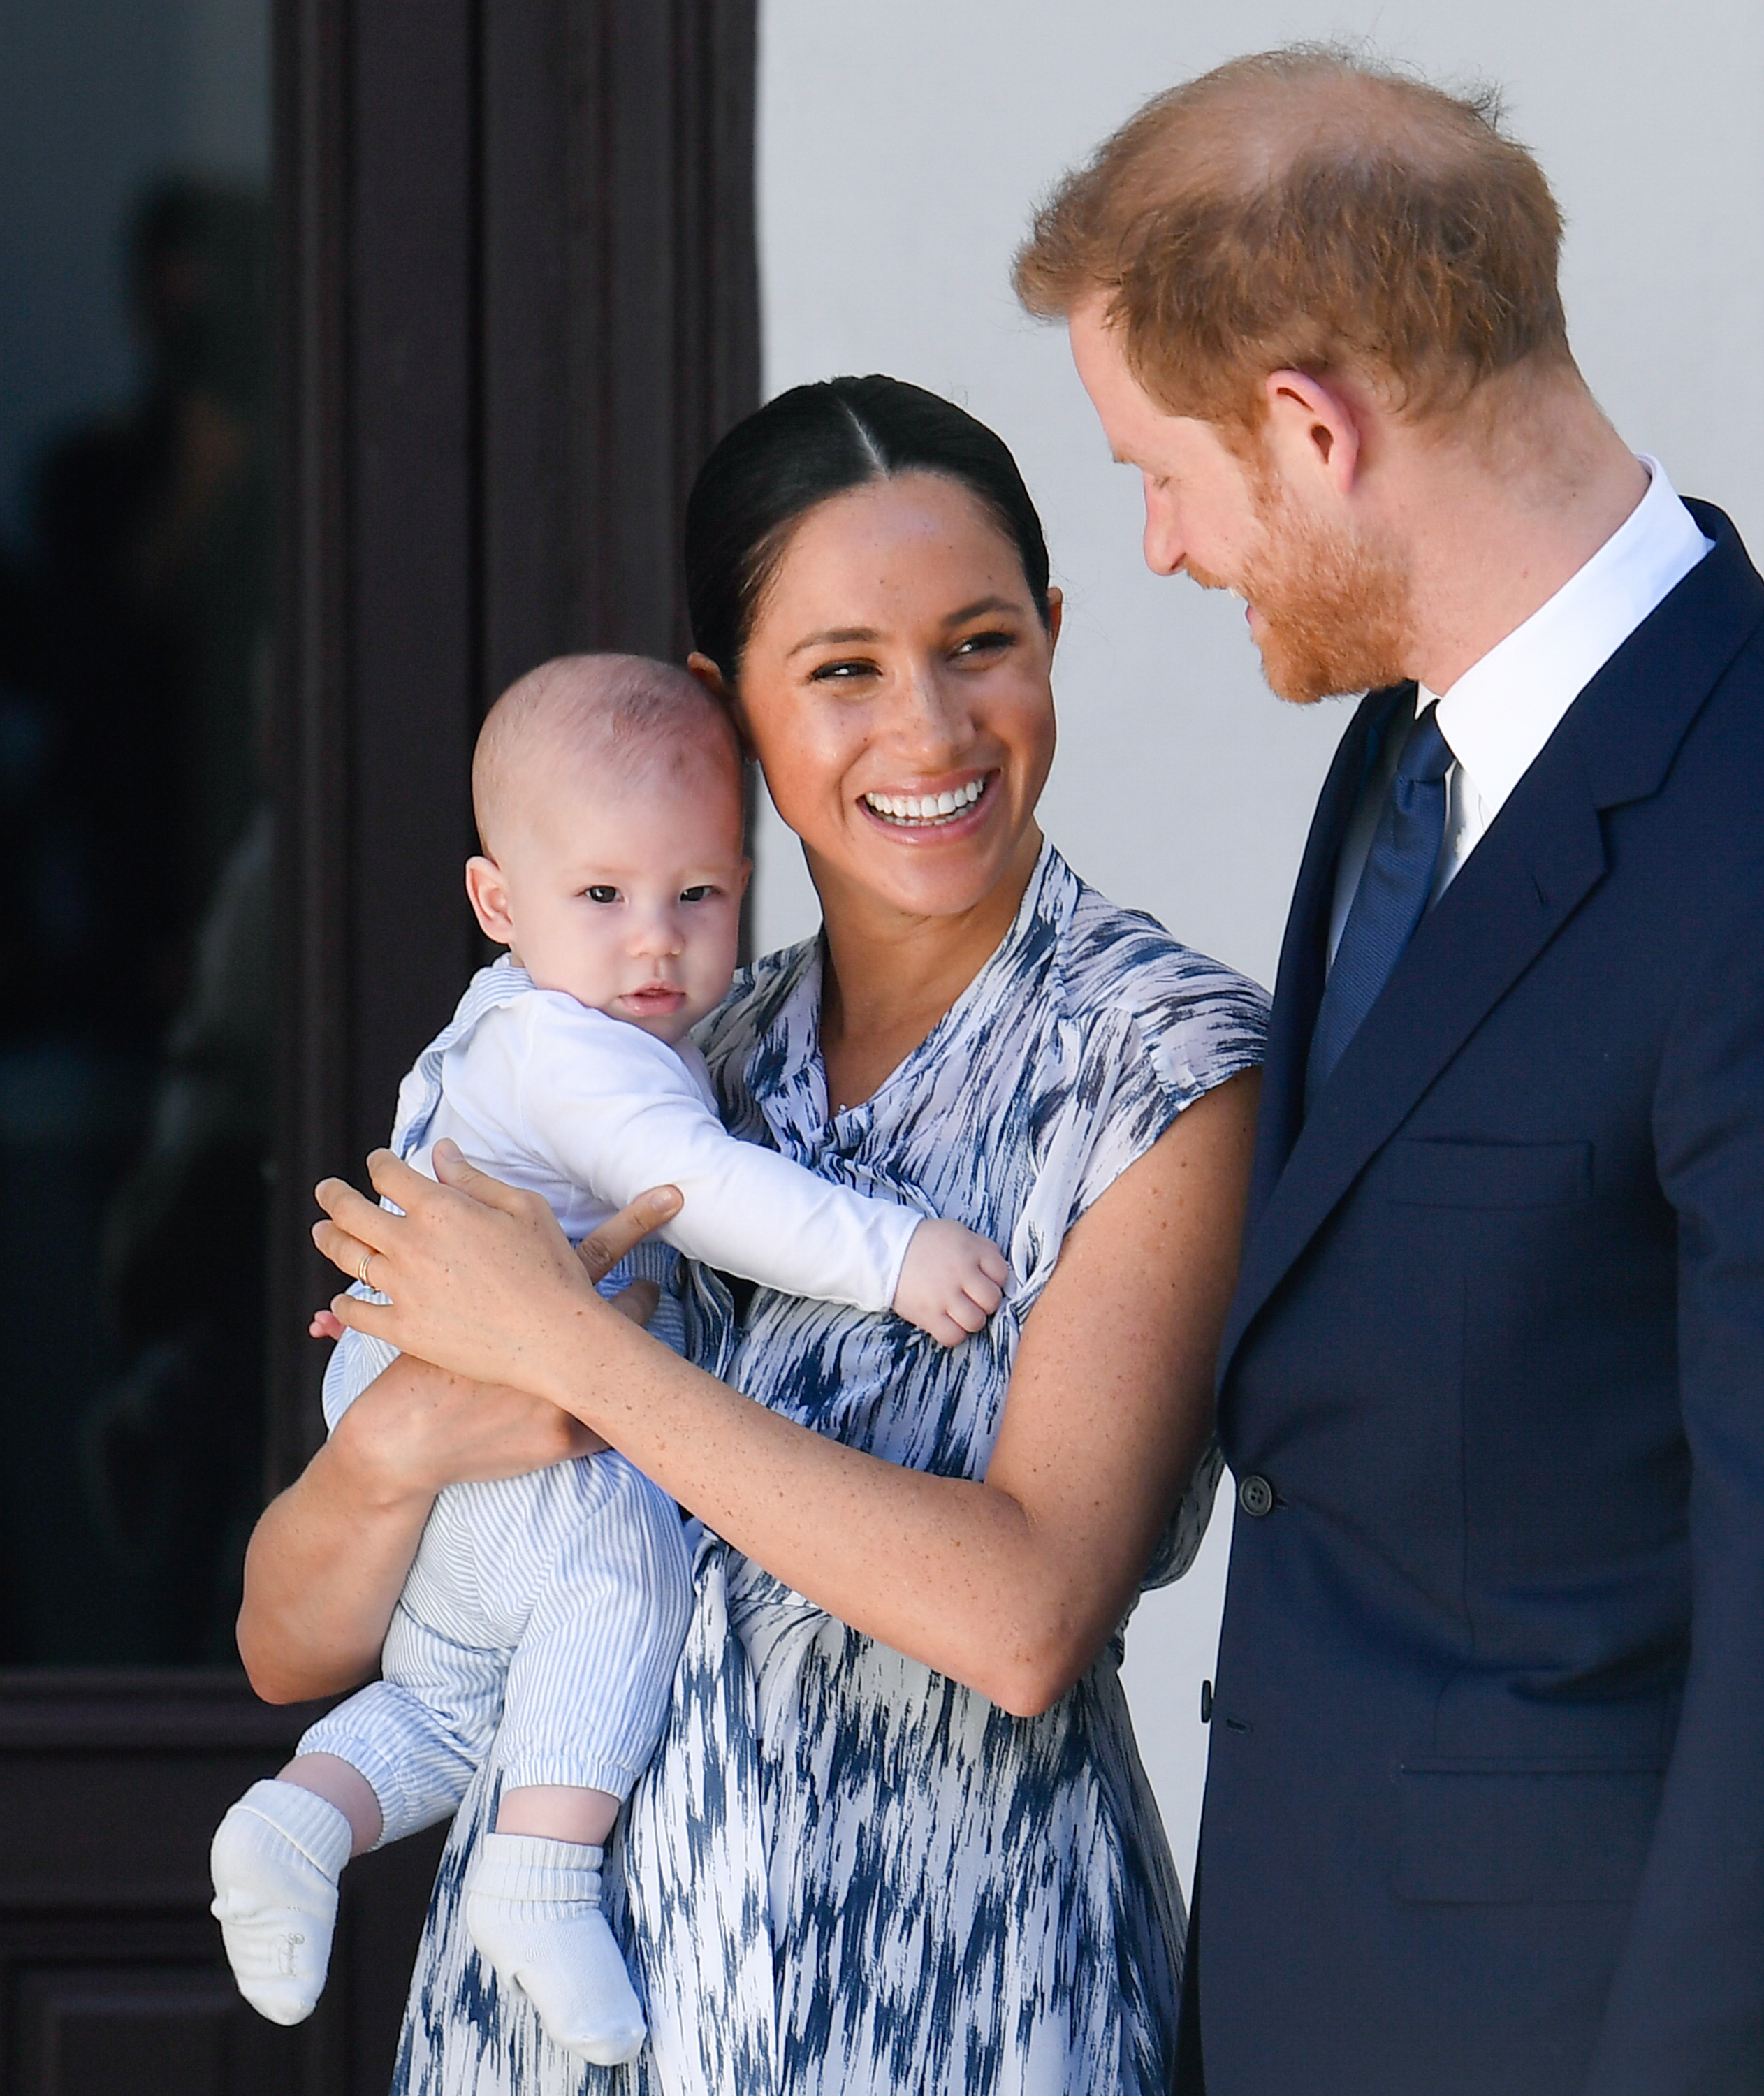 CAPE TOWN, SOUTH AFRICA - SEPTEMBER 25: Prince Harry, Duke of Sussex, Meghan, Duchess of Sussex and their baby son Archie Mountbatten-Windsor meet Archbishop Desmond Tutu and his daughter Thandeka Tutu-Gxashe at the Desmond & Leah Tutu Legacy Foundation during their royal tour of South Africa on September 25, 2019 in Cape Town, South Africa. (Photo by Pool/Samir Hussein/WireImage)